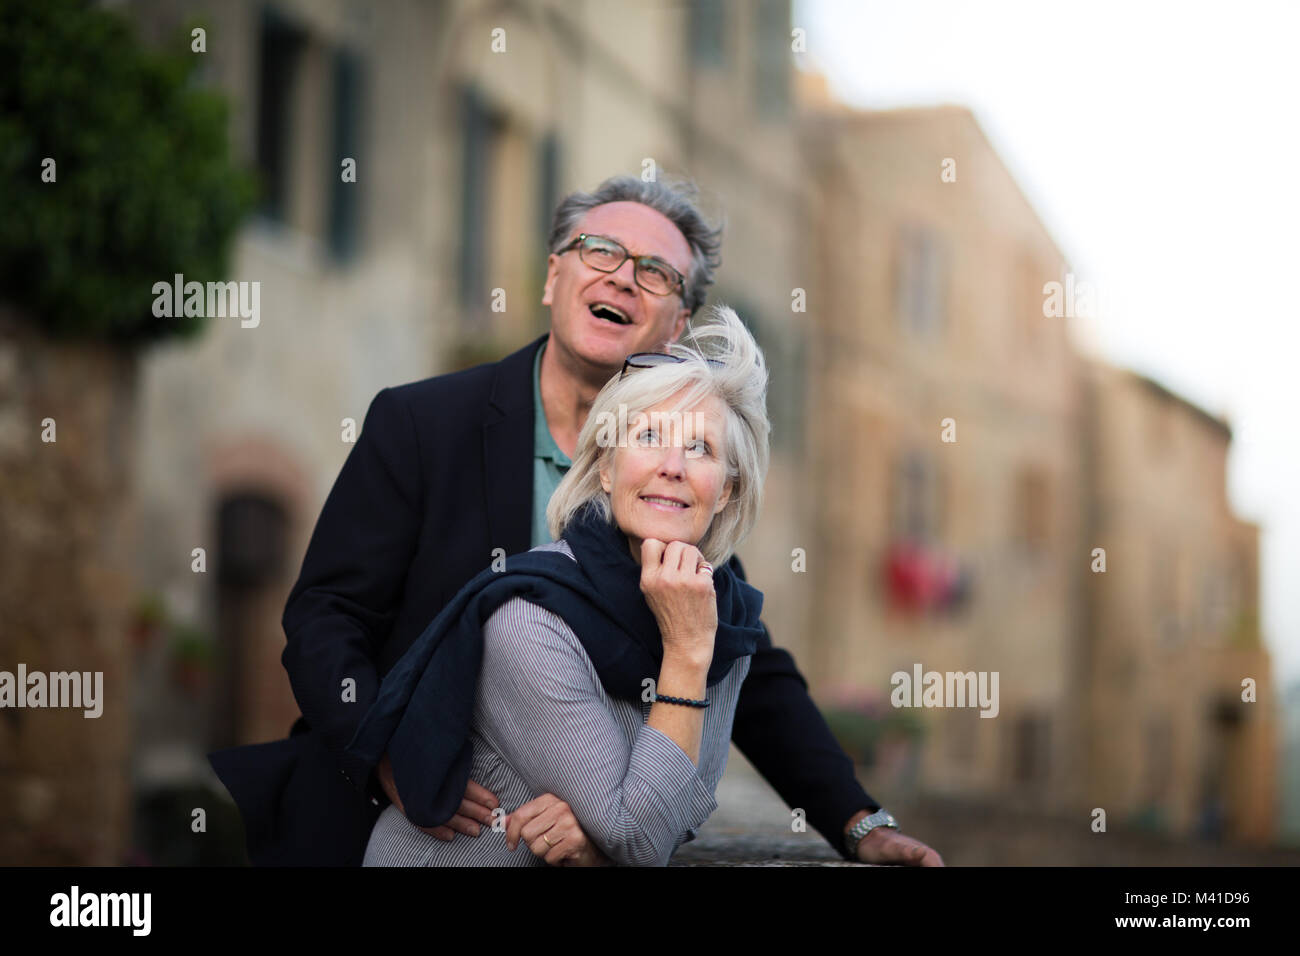 Senior couple on vacation looking at a tourist site Stock Photo